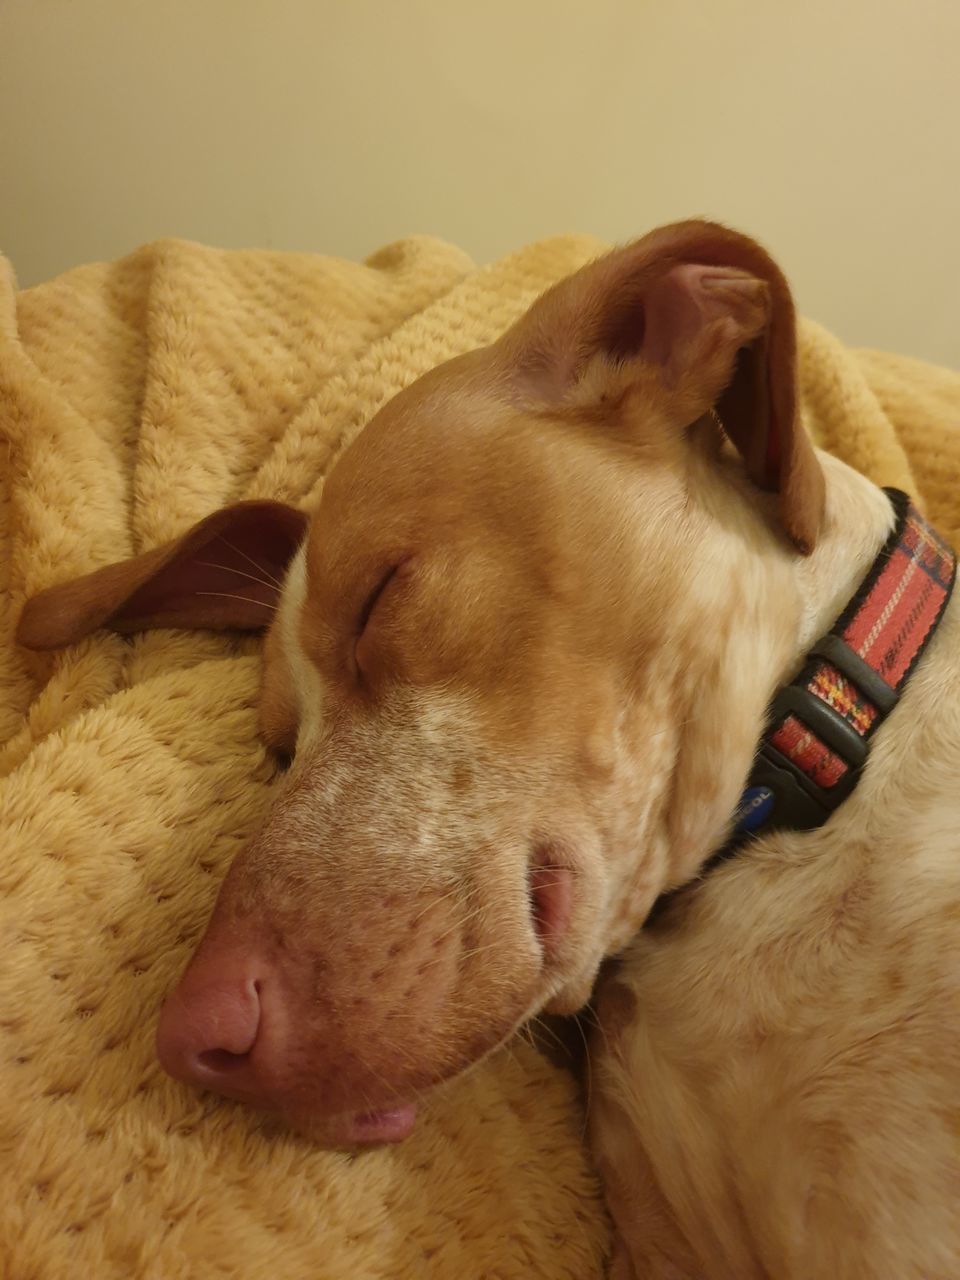 CLOSE-UP OF DOG SLEEPING IN THE BED